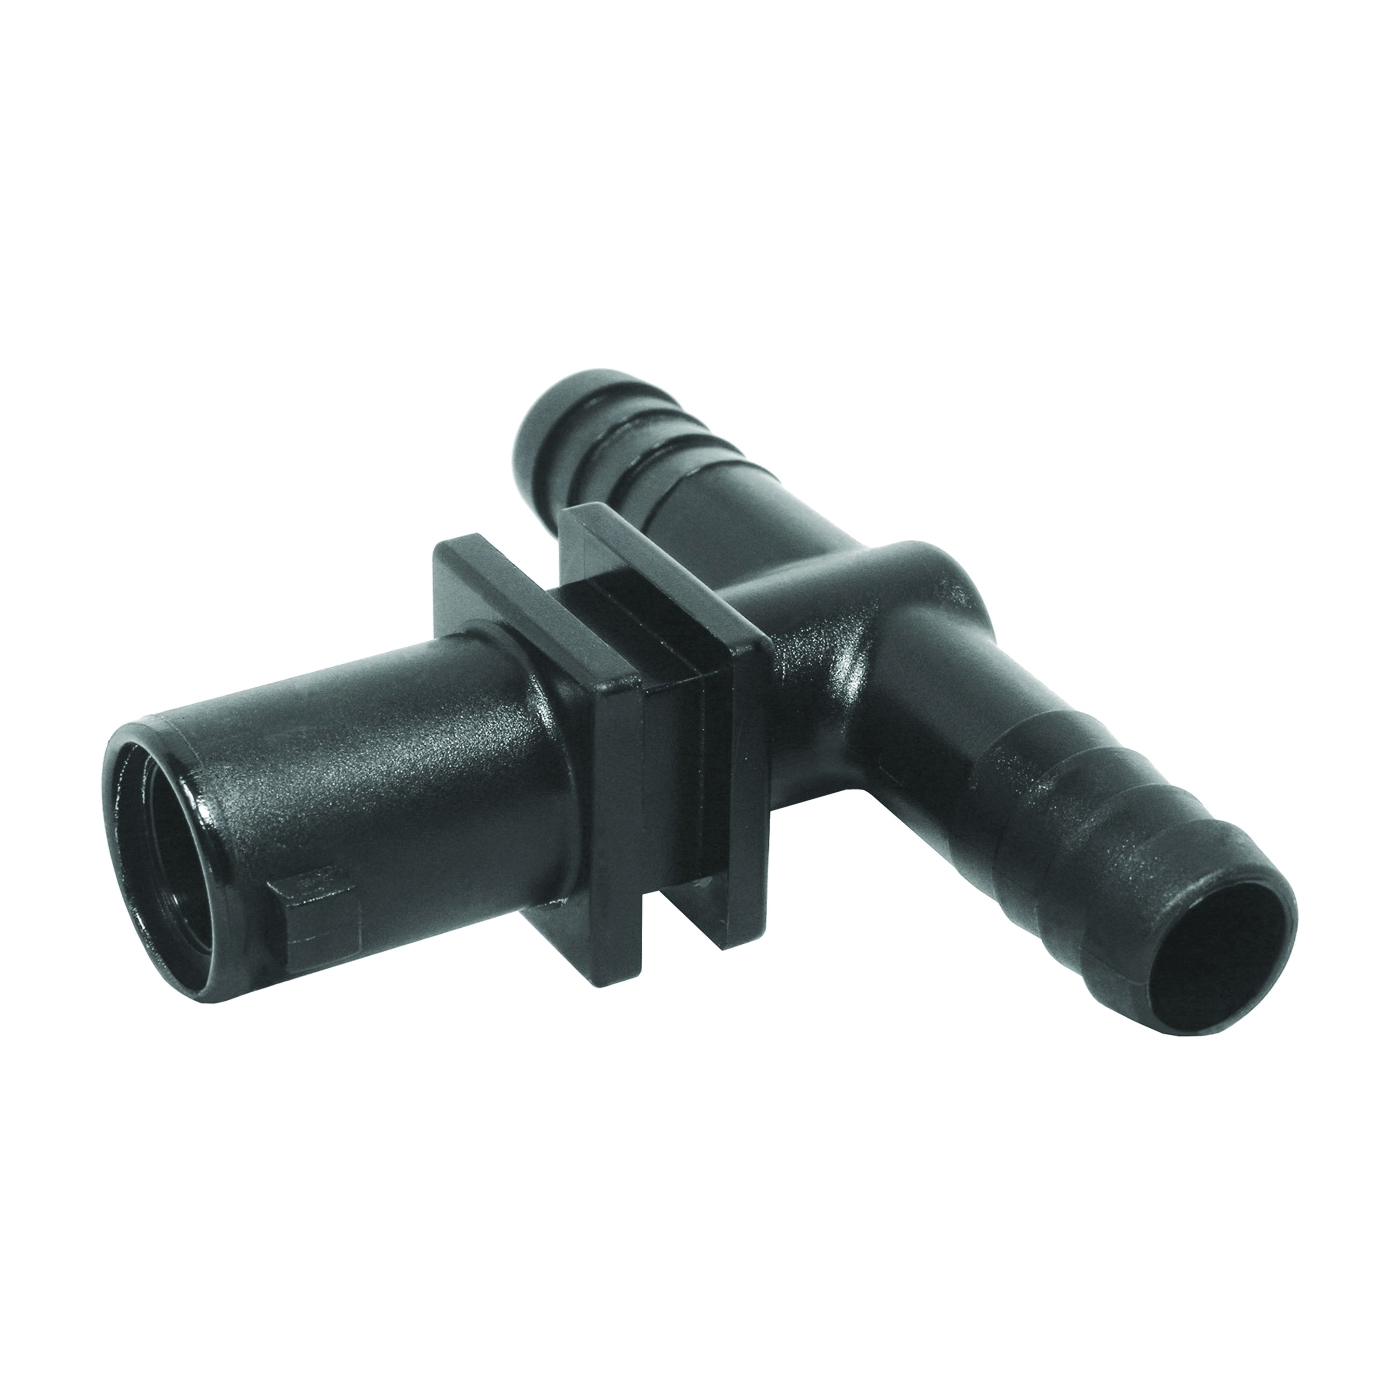 Y8231011 Dry Boom Nozzle Body Tee, 3/4 in, Quick x Hose Barb, 7 psi Pressure, EPDM Rubber